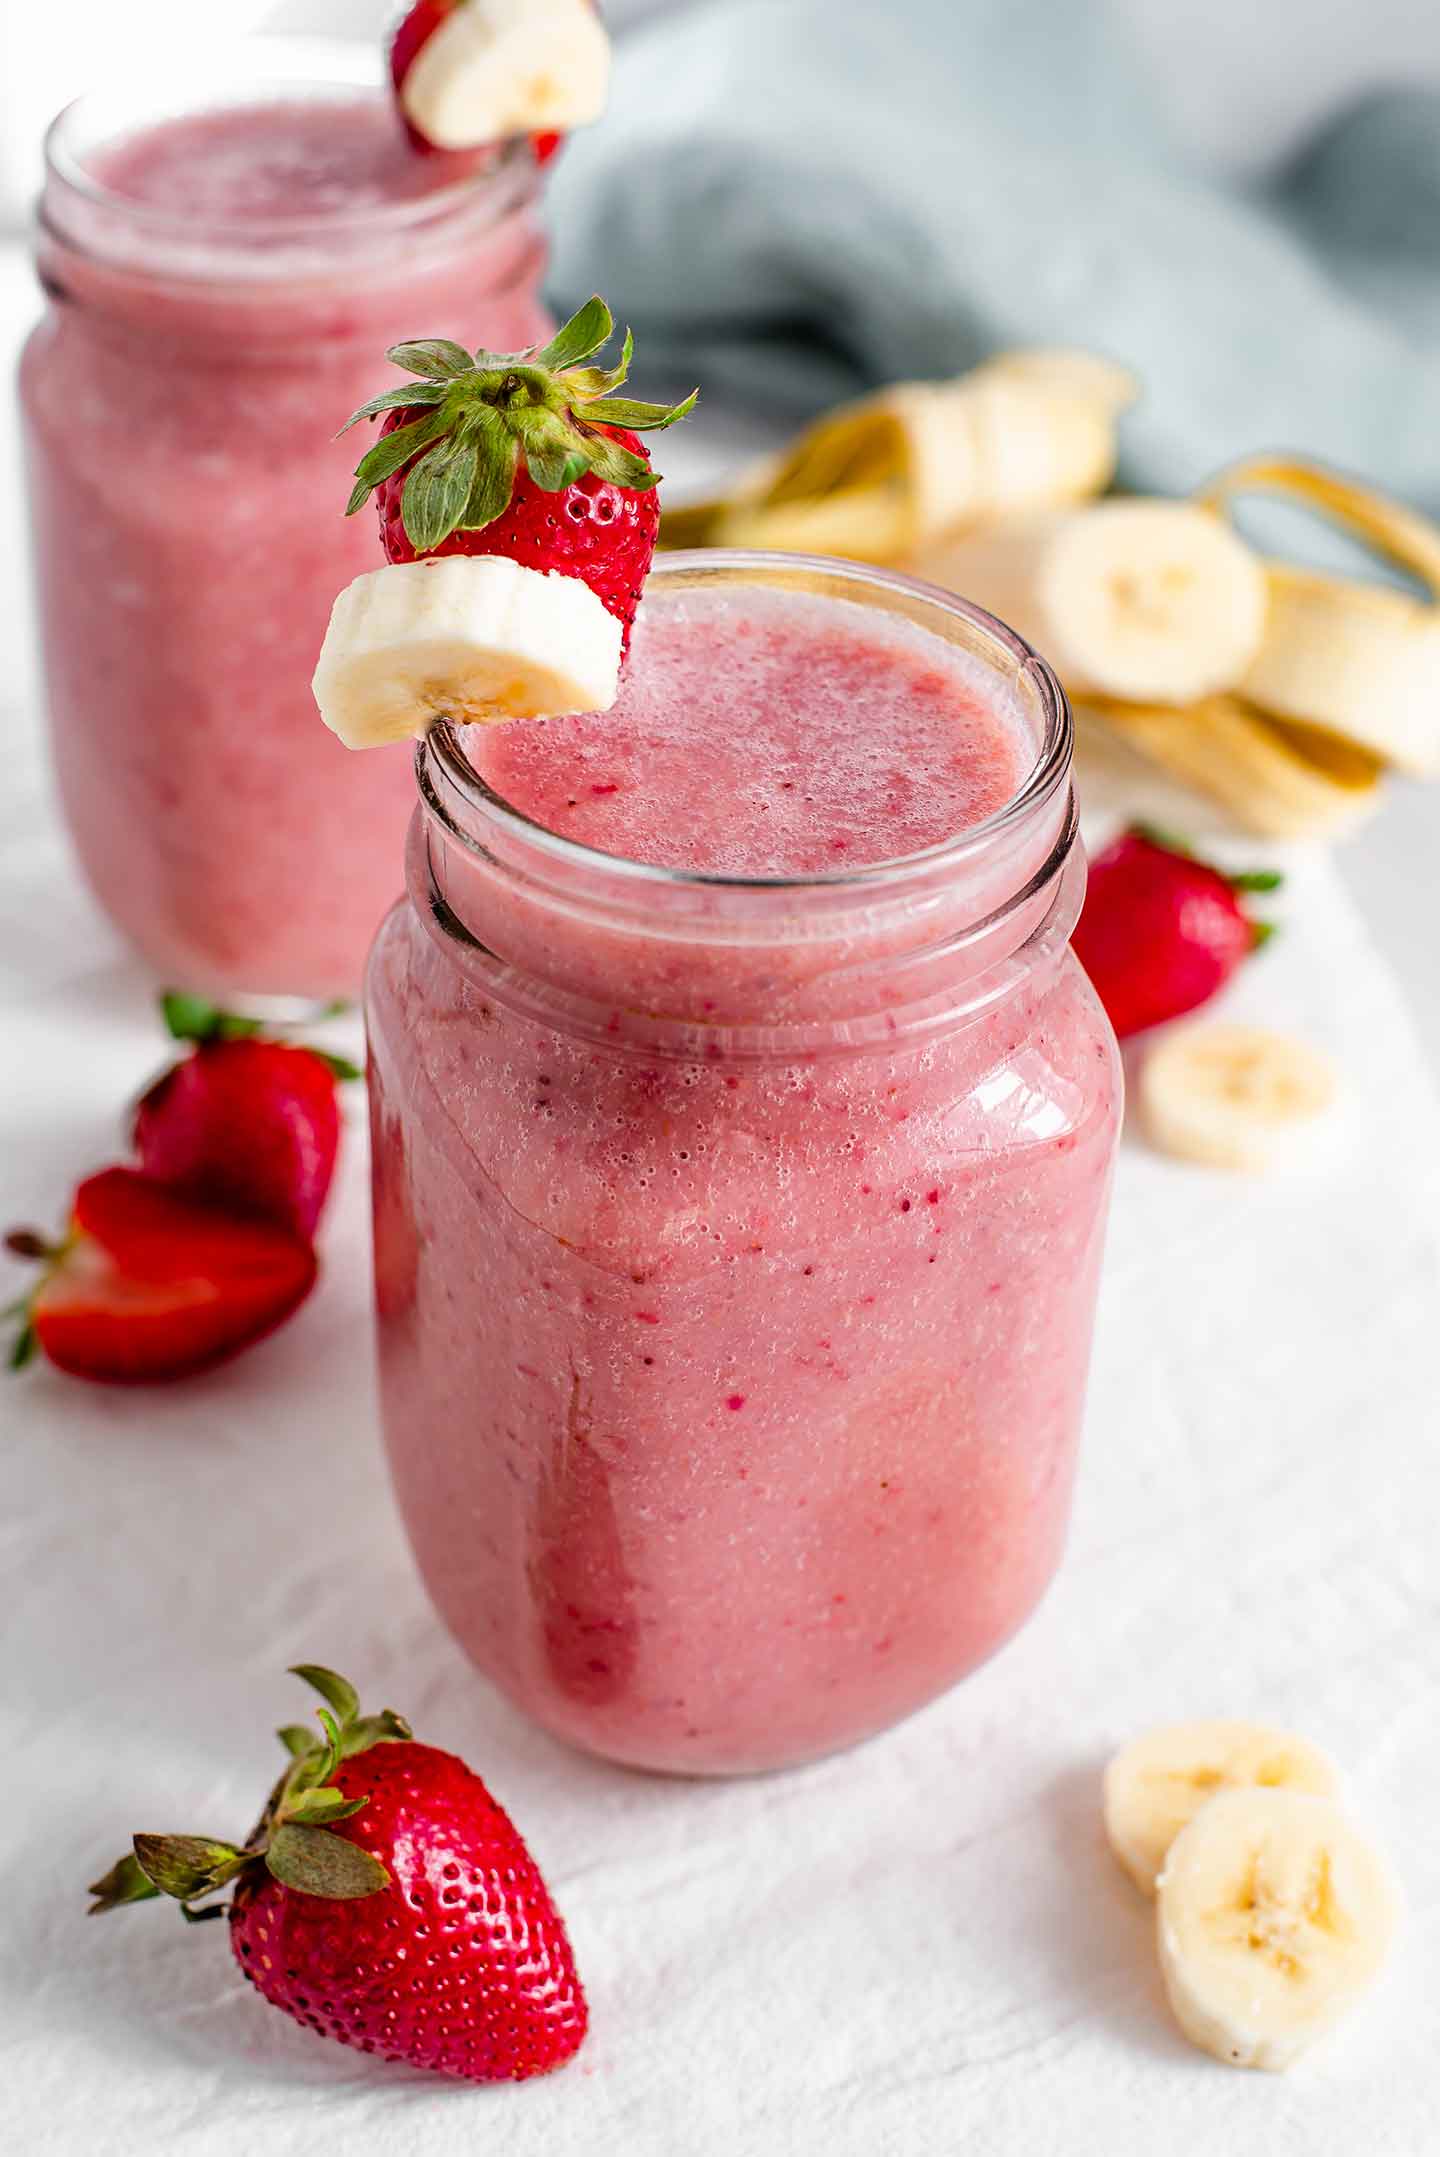 Strawberry Banana Smoothie A Popular Favourite • Tasty Thrifty Timely 